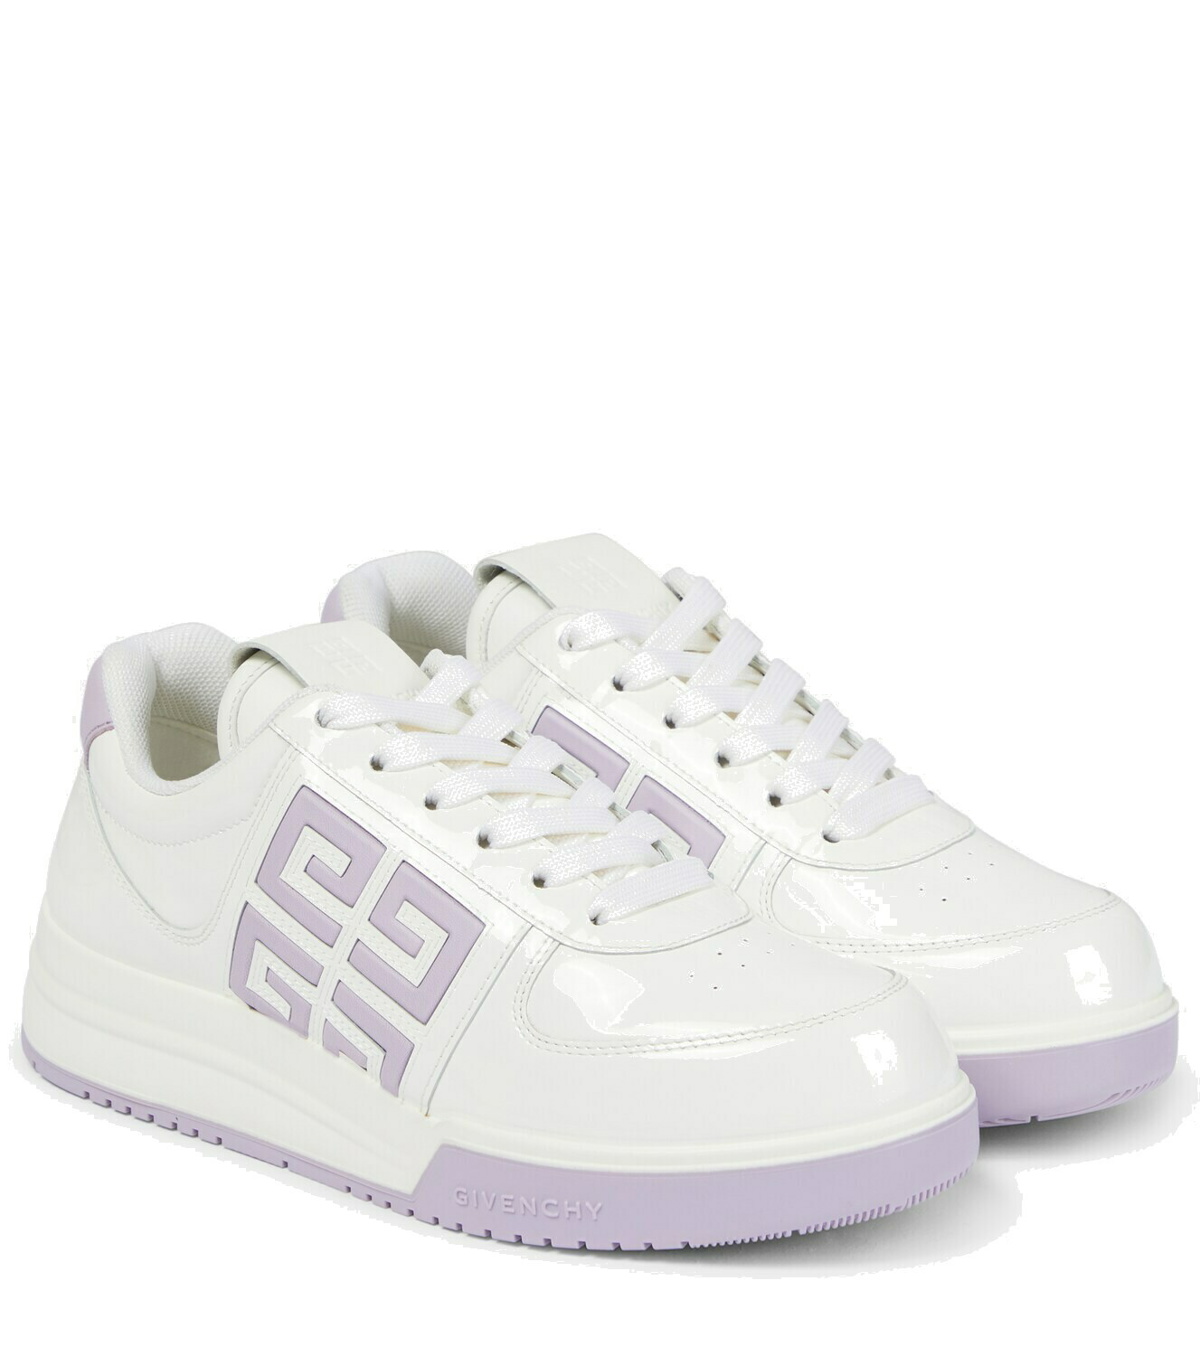 Givenchy G4 leather low-top sneakers Givenchy